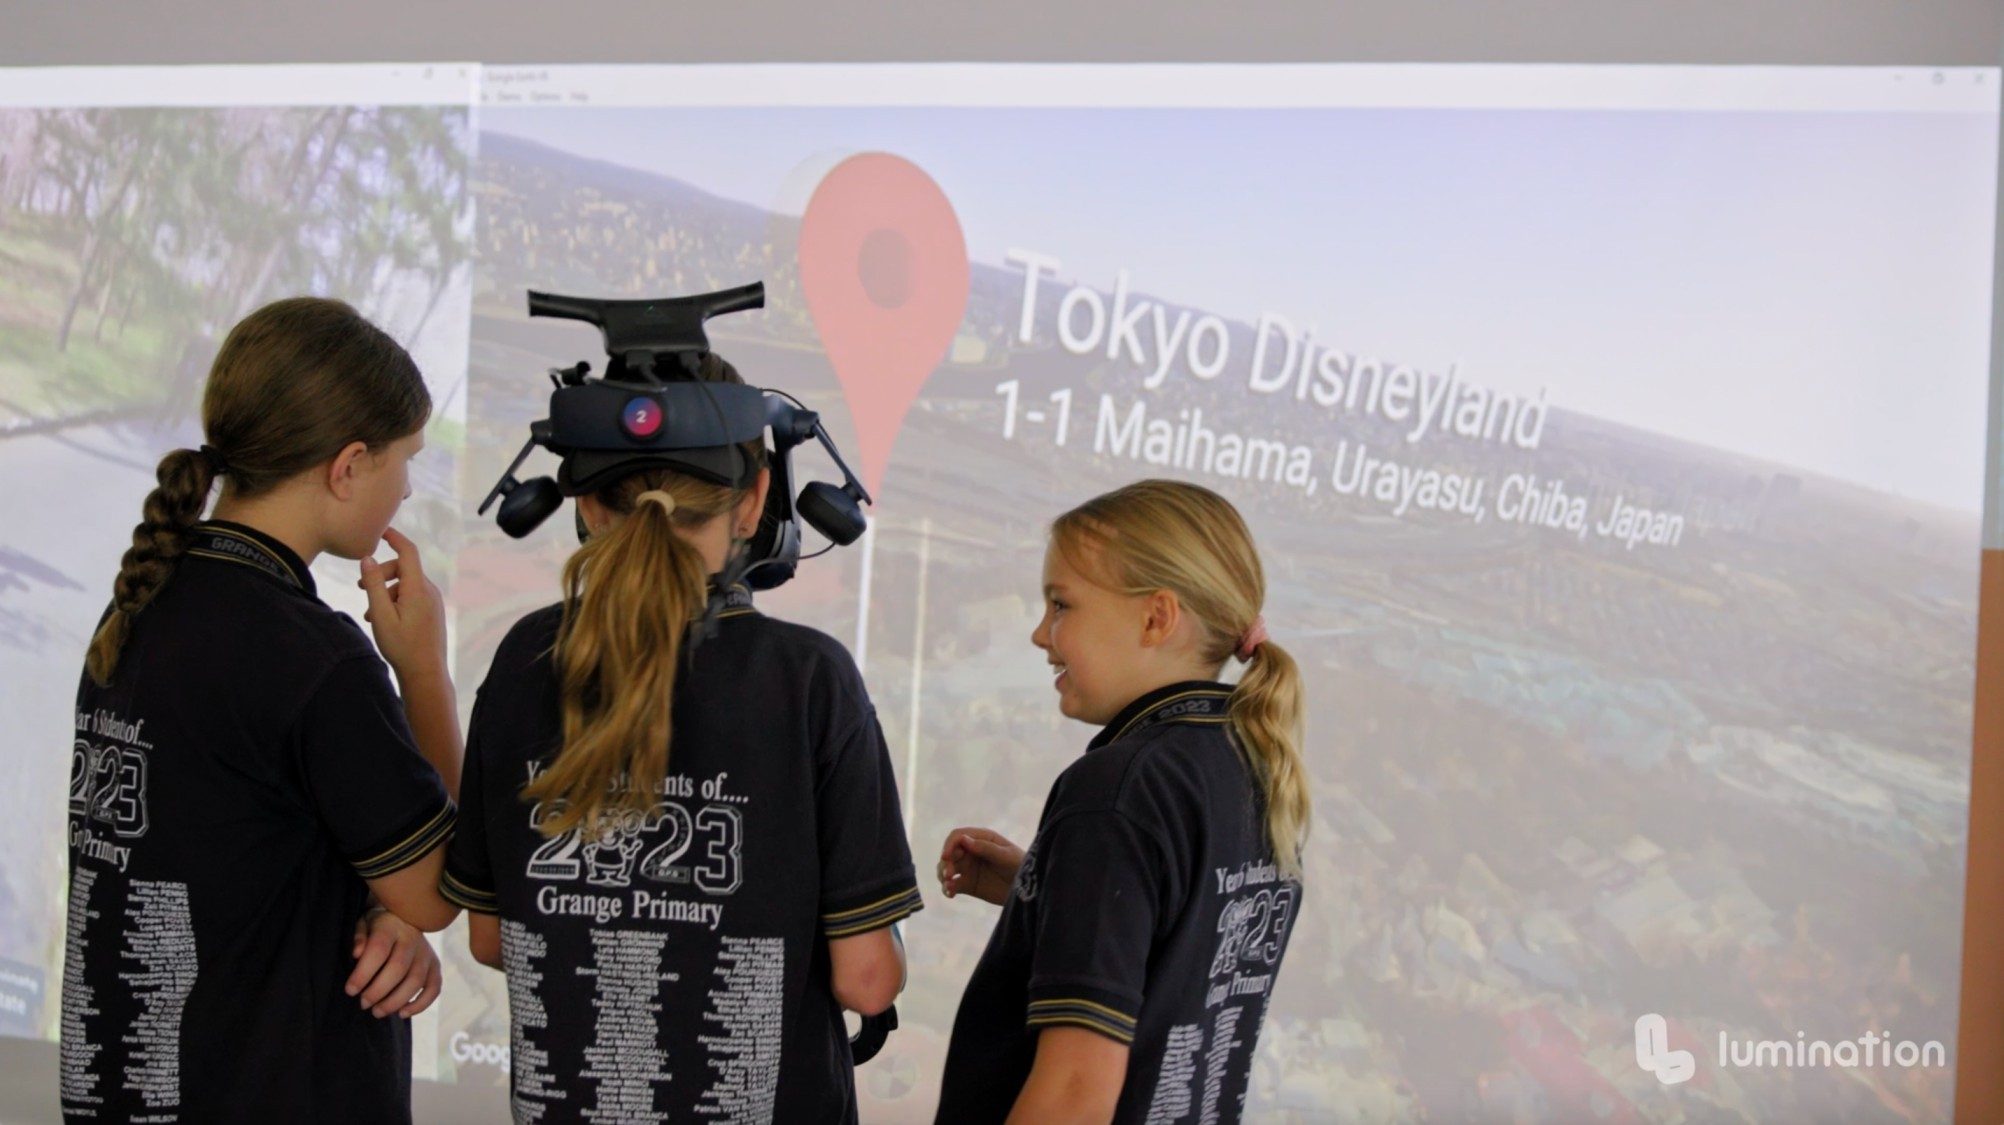 Student engagement using virtual reality at Grange with three students wearing virtual reality headsets and screen depicting where they are visiting in Google Earth: Tokyo Disneyland in Japan